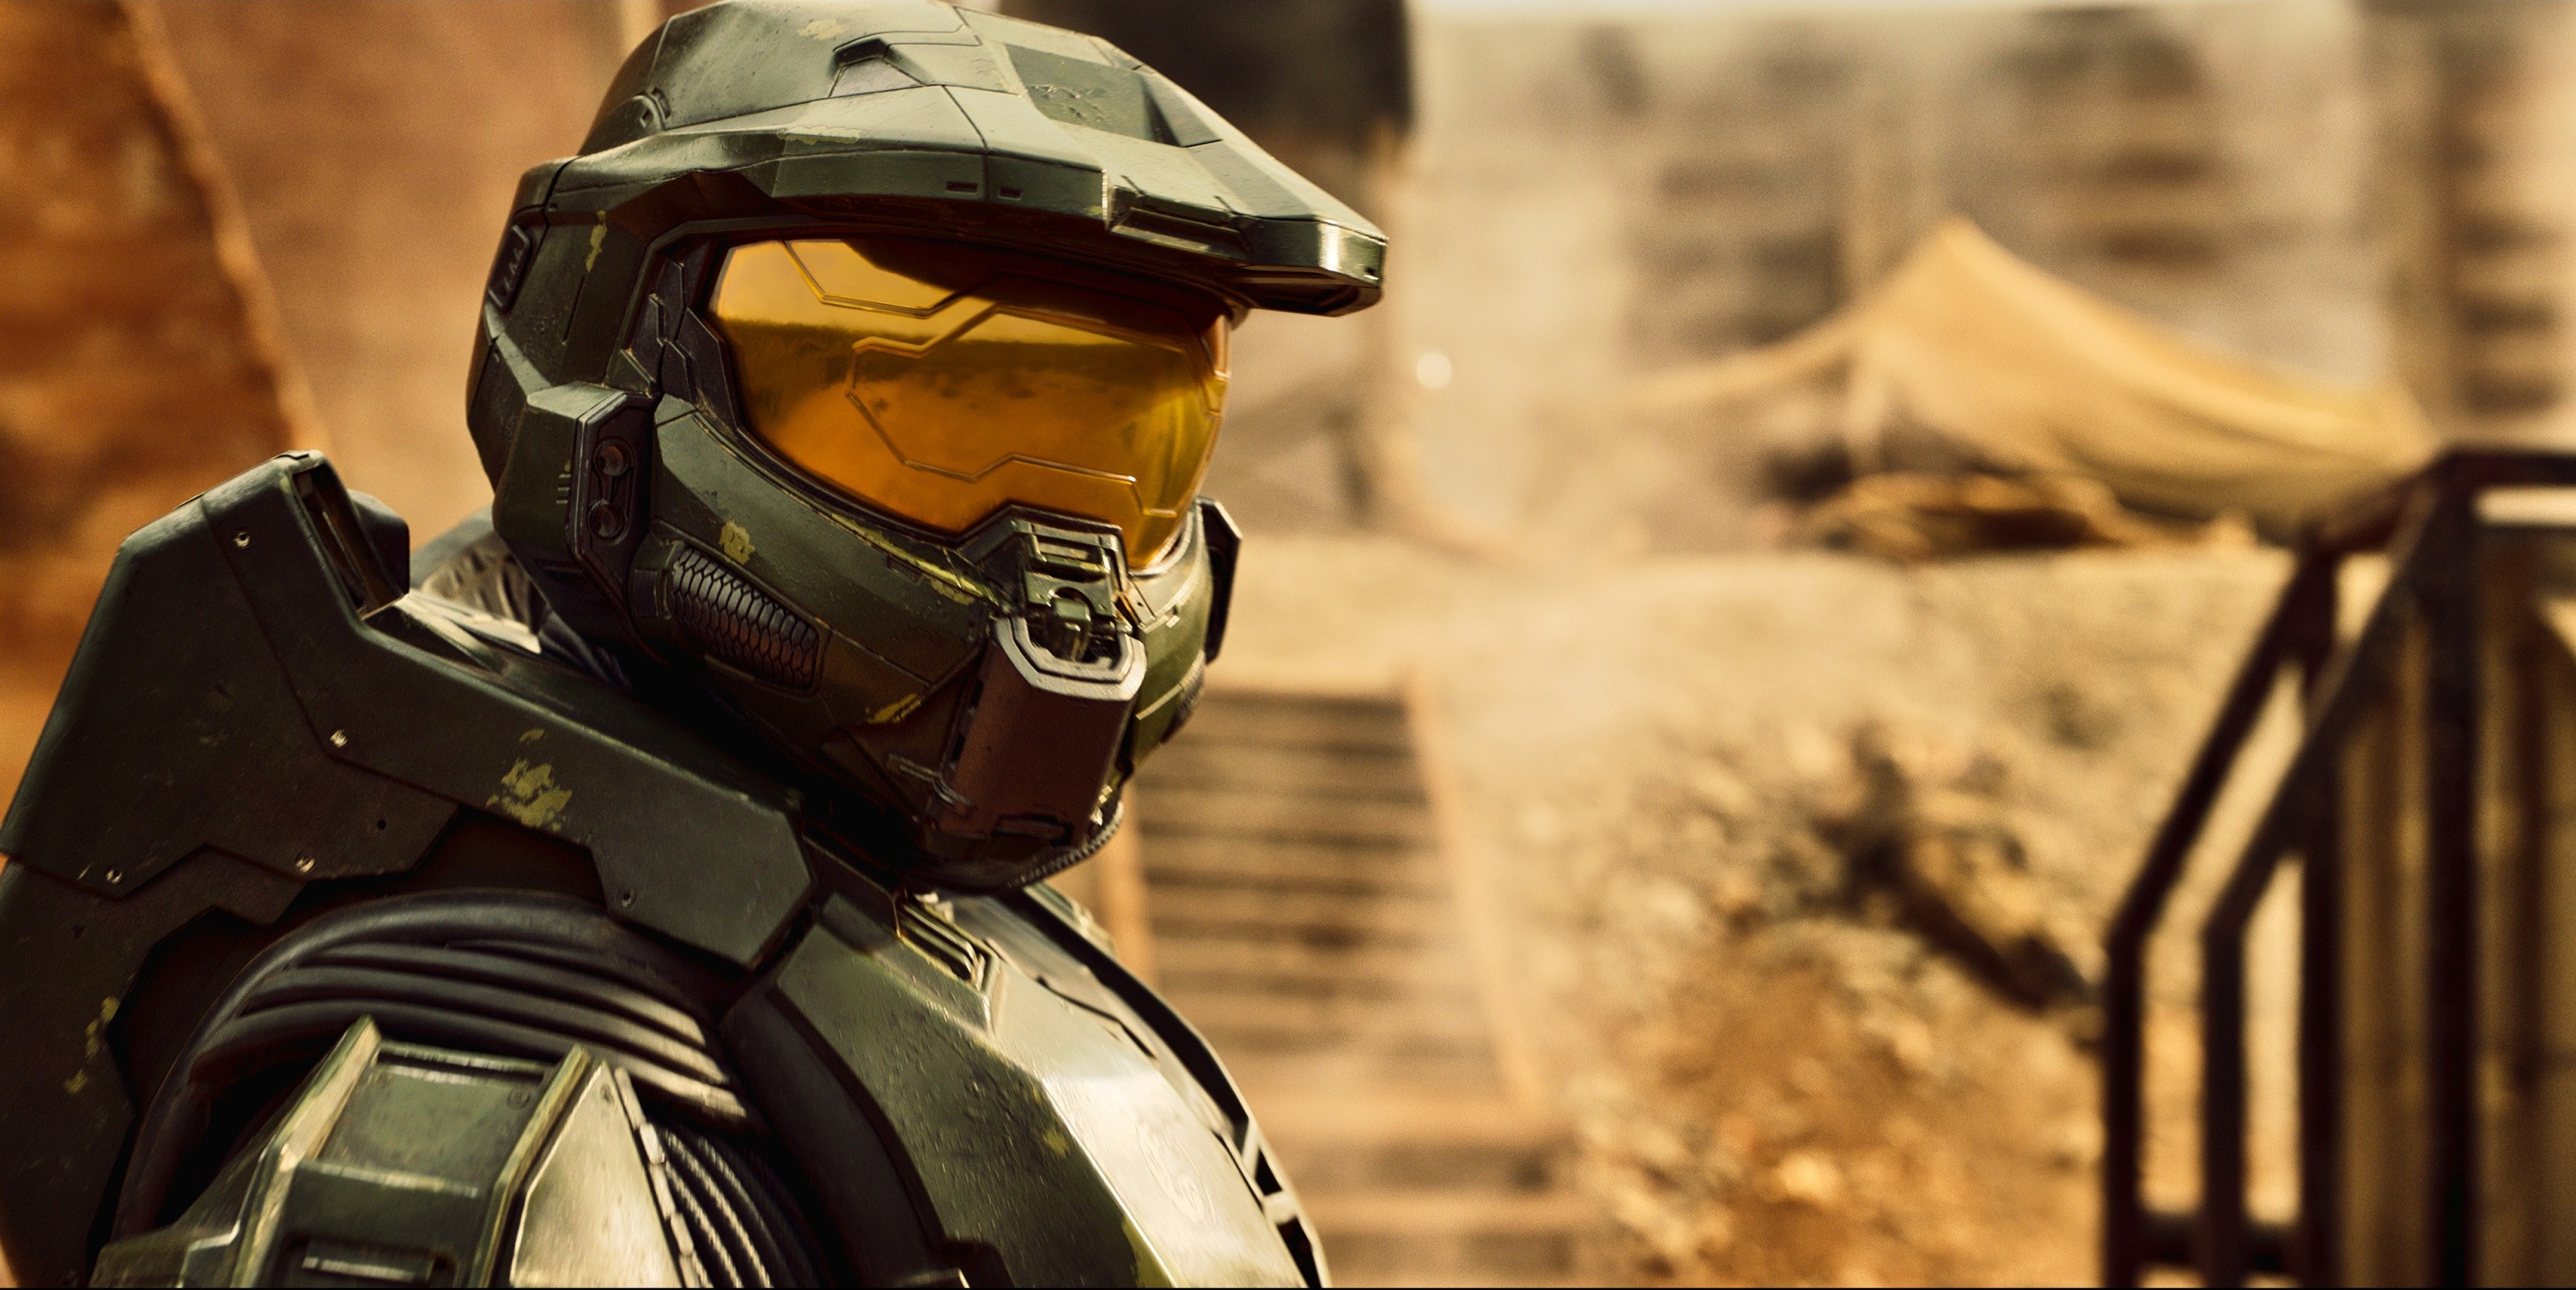 The First Episode of ‘Halo’ is Streaming for Free on YouTube